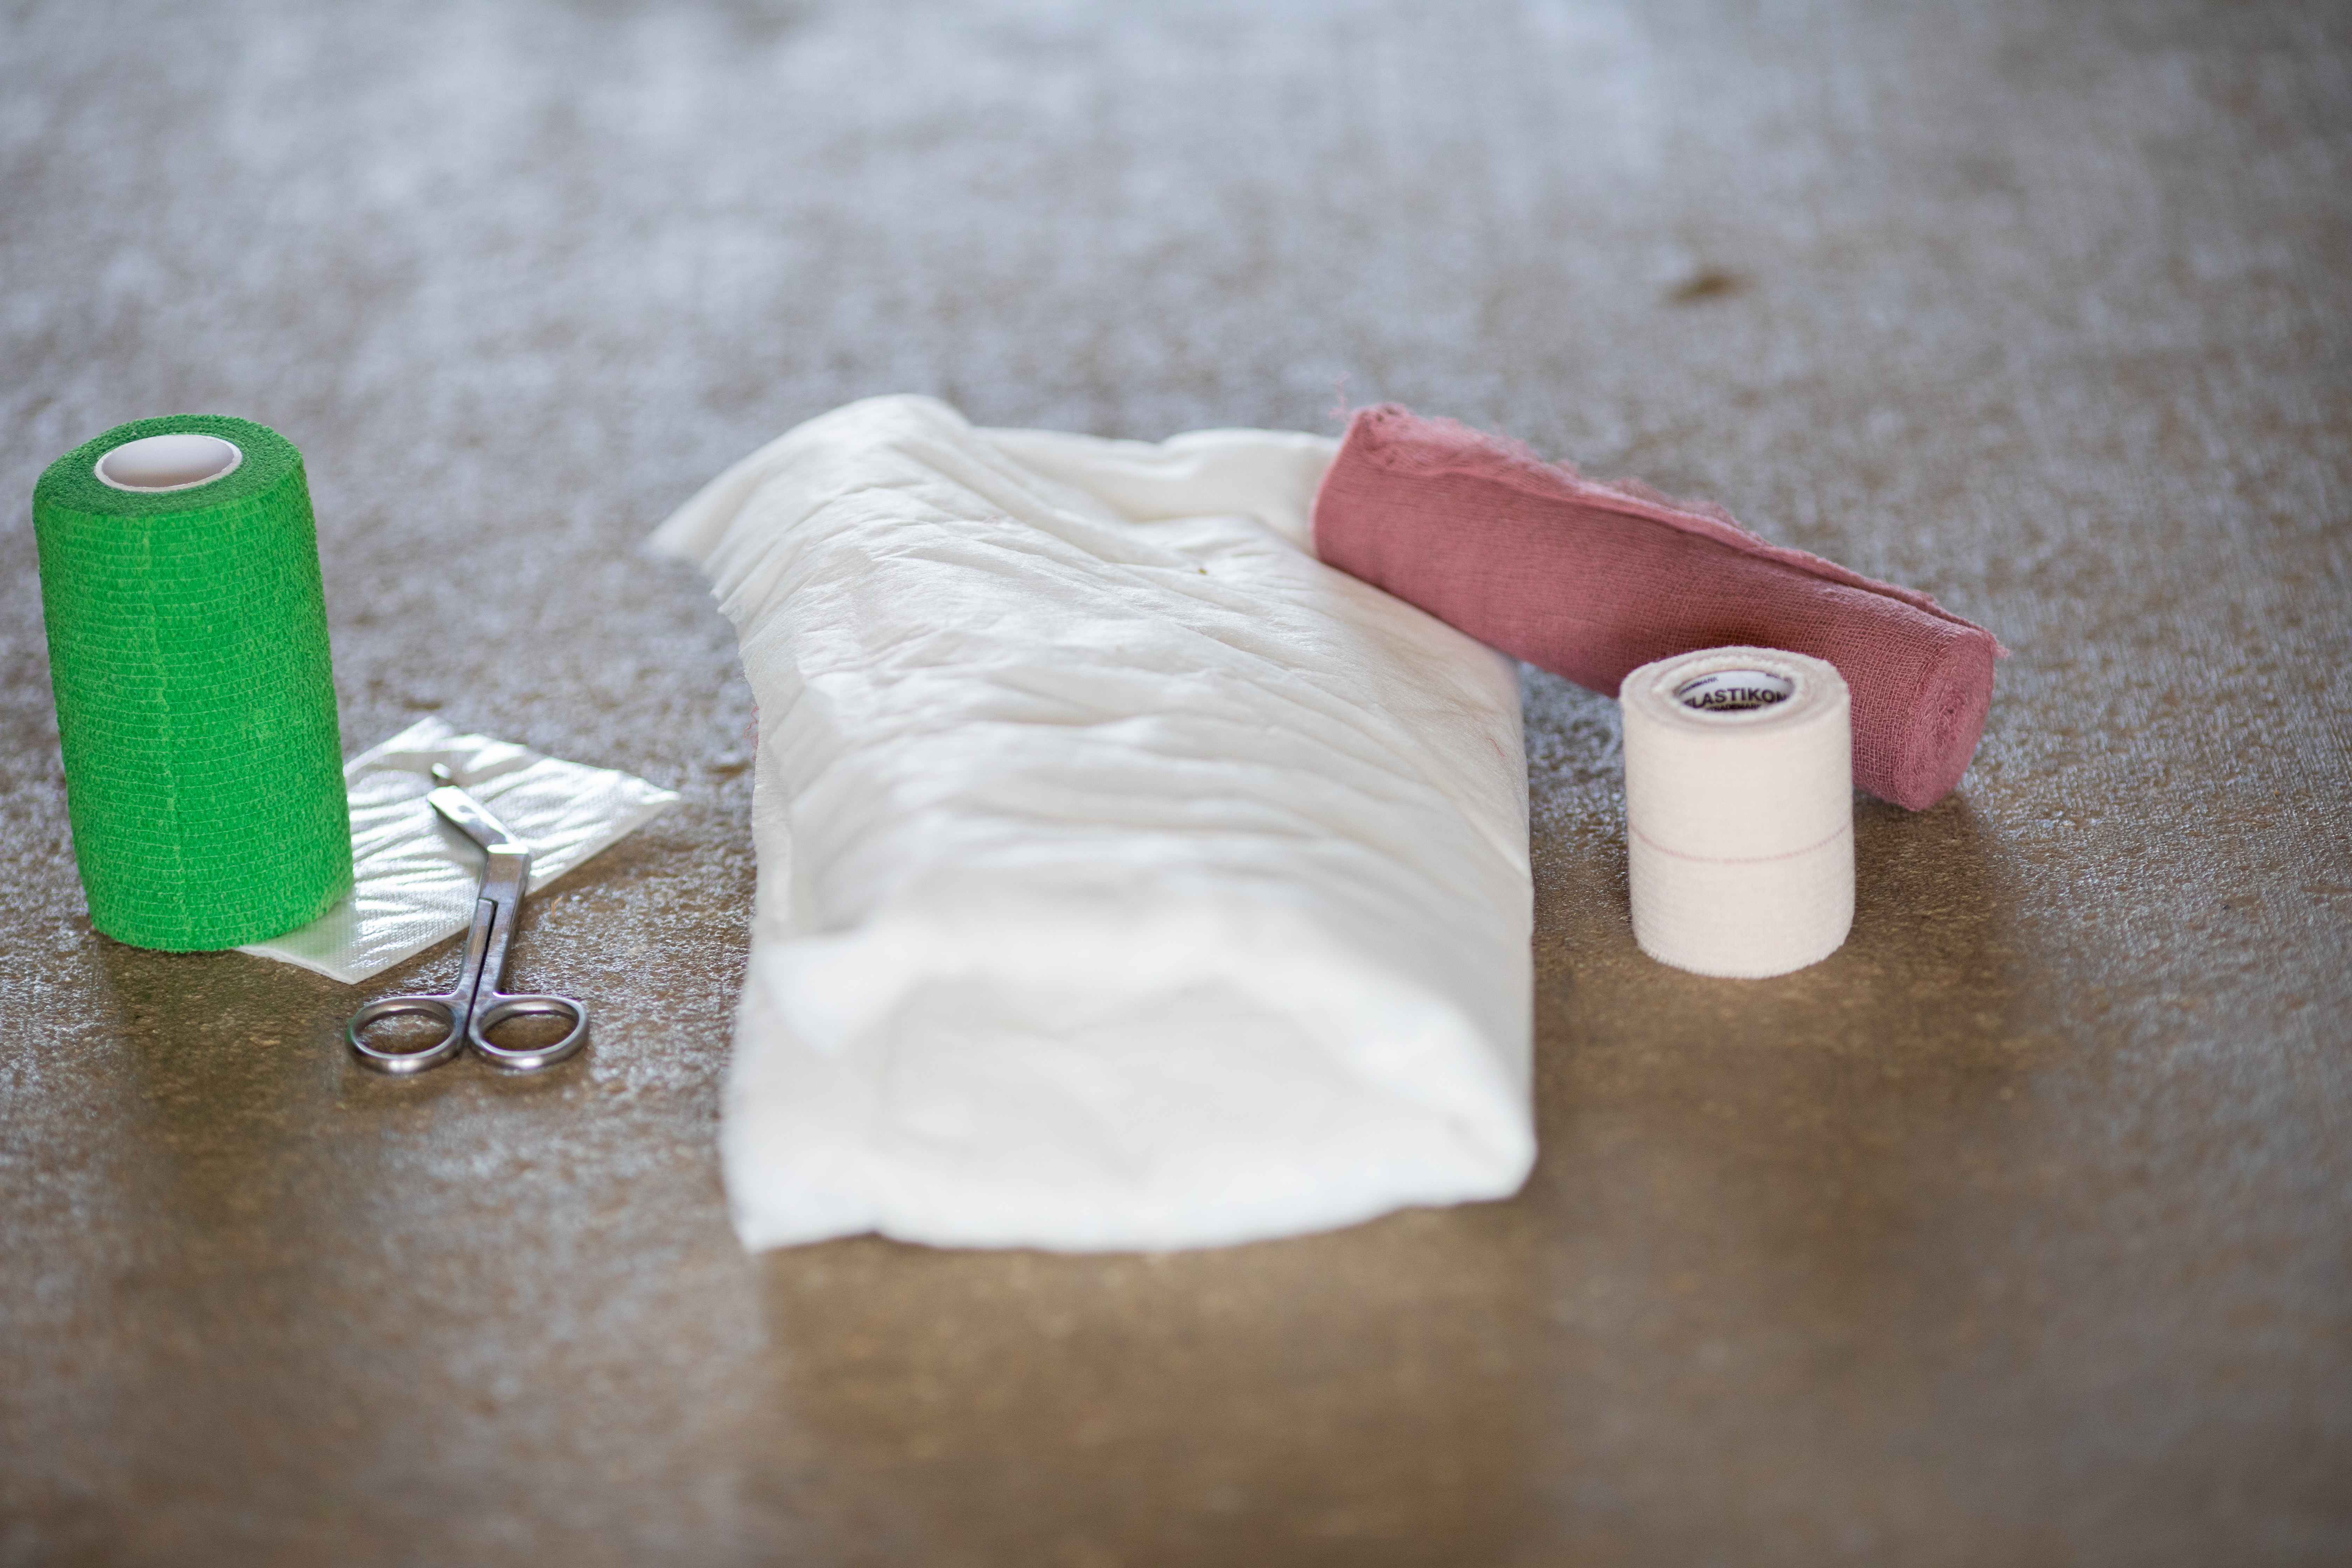 Barn medicine chest supplies such as gauze, scissors and vet wrap,


